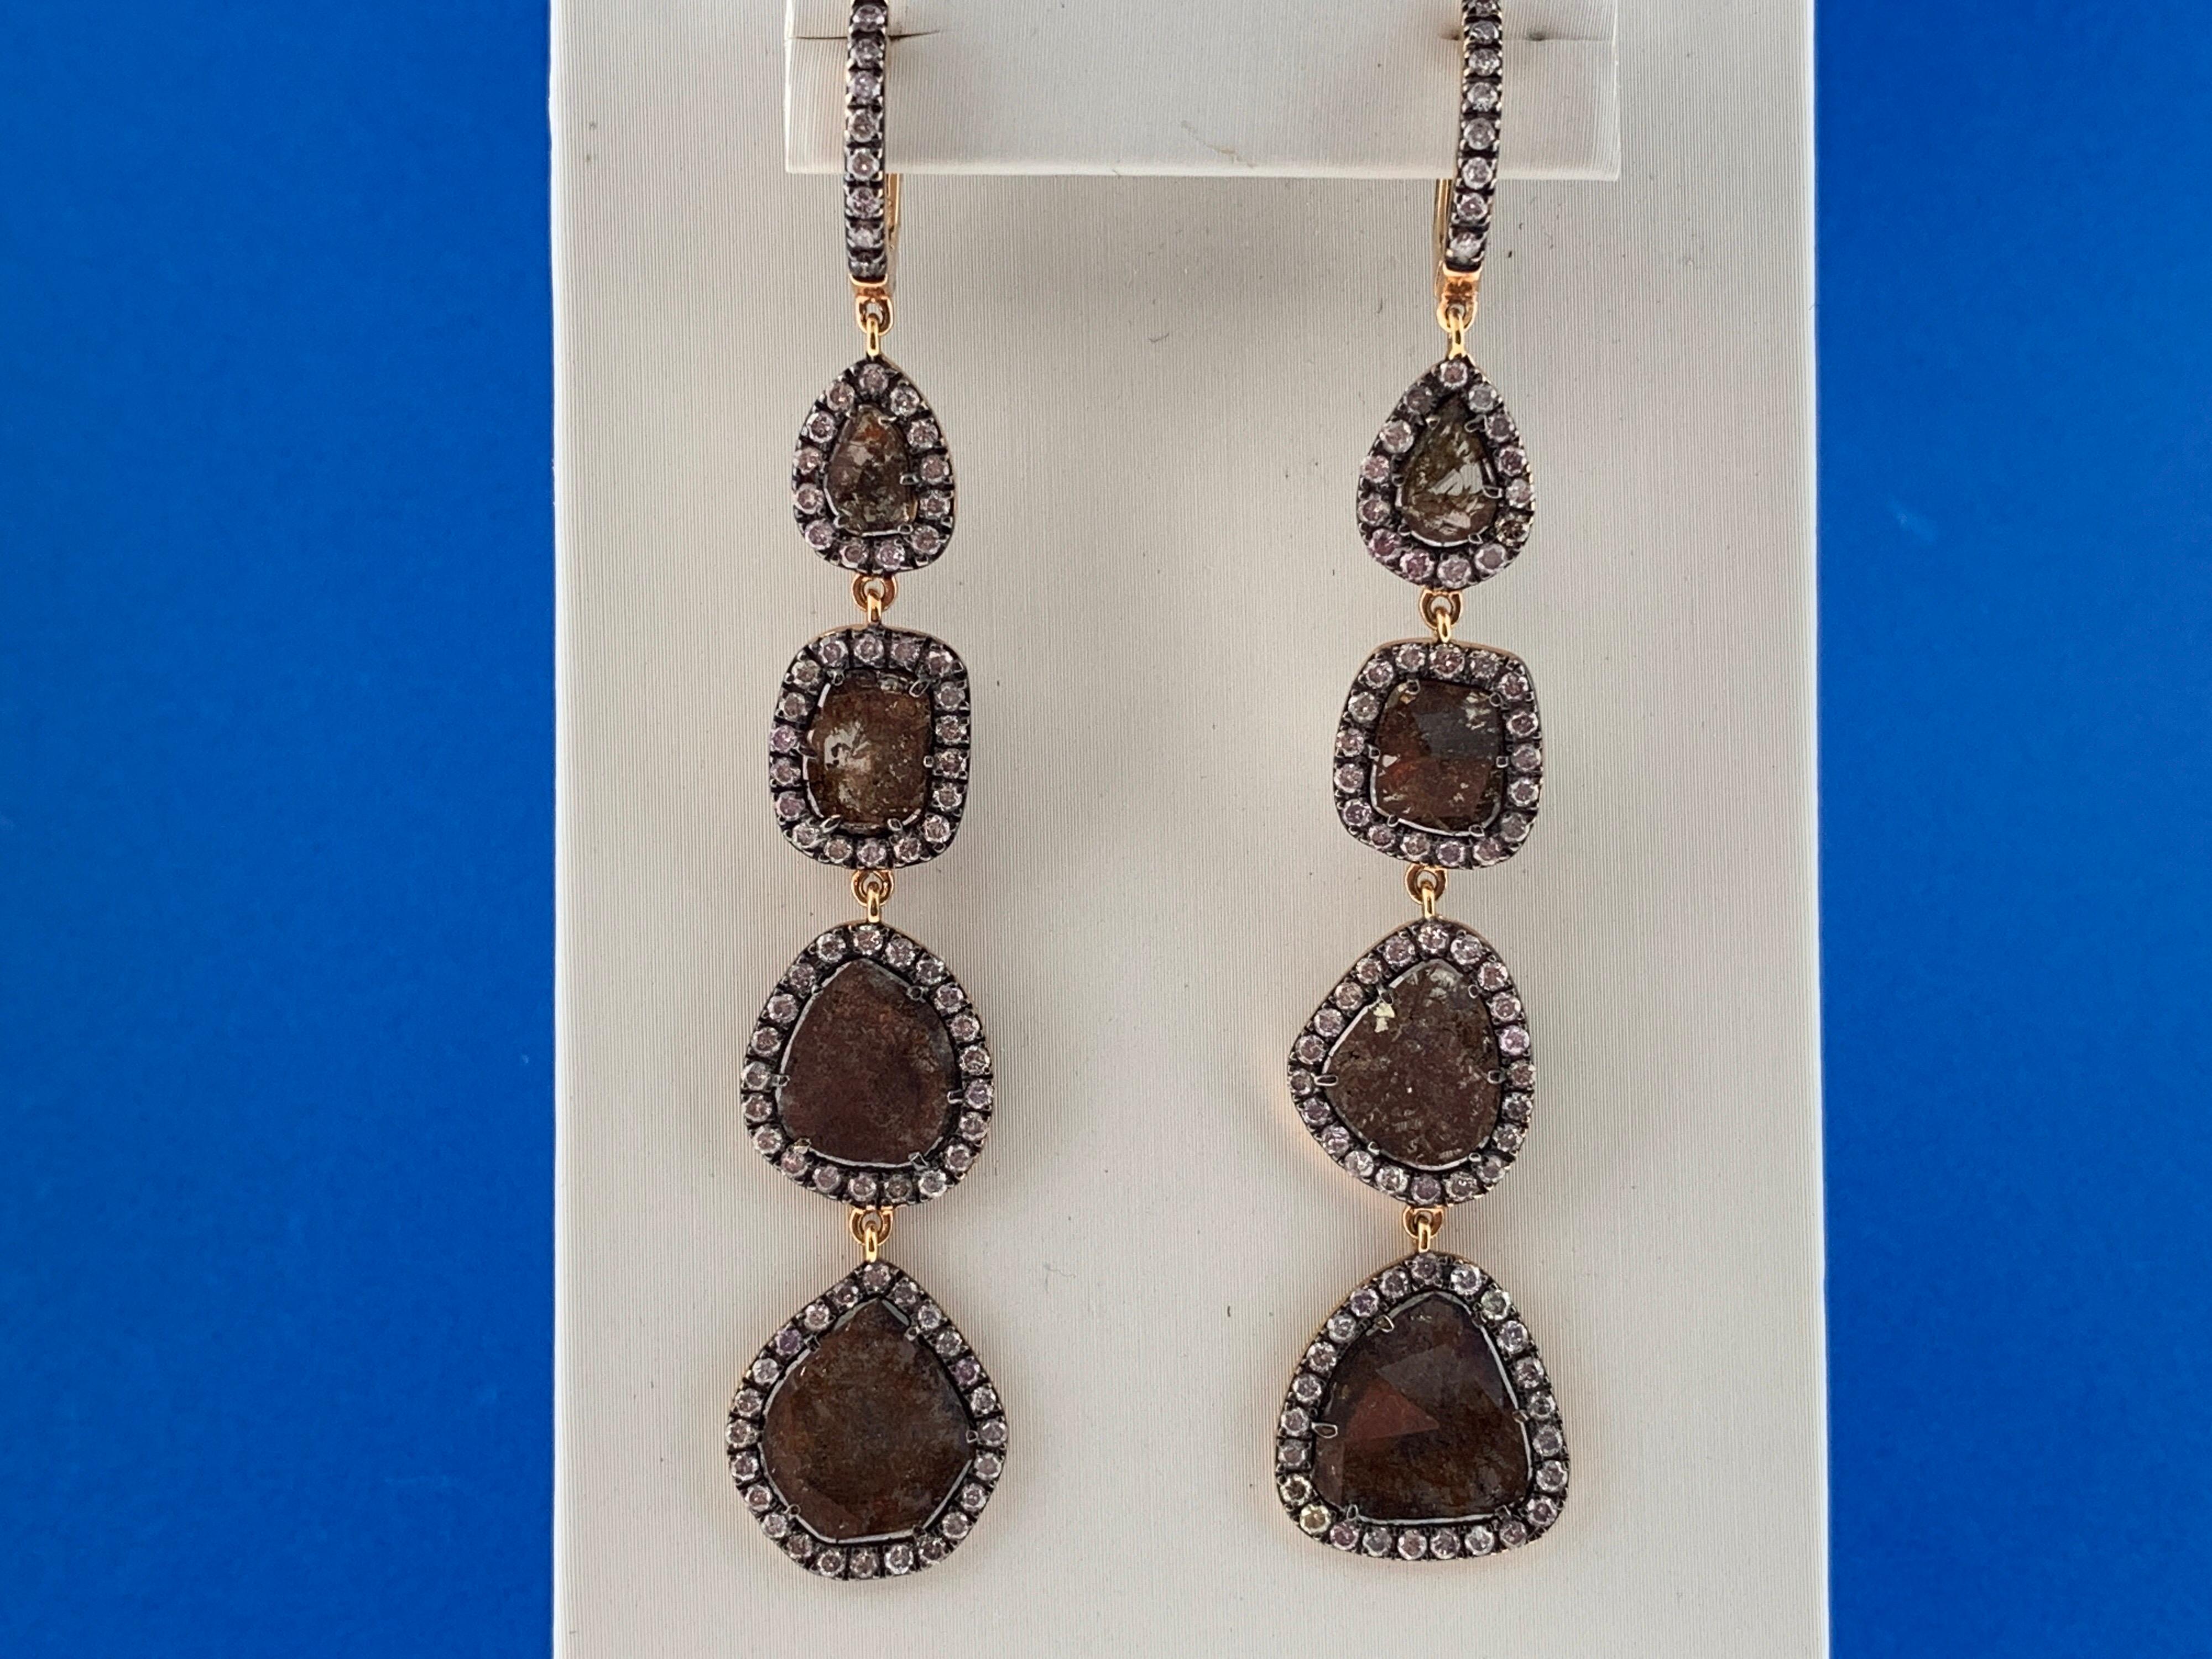 These stunning earrings feature 8 Rose Cut Slice Brown Diamonds, for a total of 5.97 Carats, each encircled in a single halo of round brilliant Diamonds, hanging from a Diamond hoop top. They are set in a 18k rose gold setting.
Total diamond weight